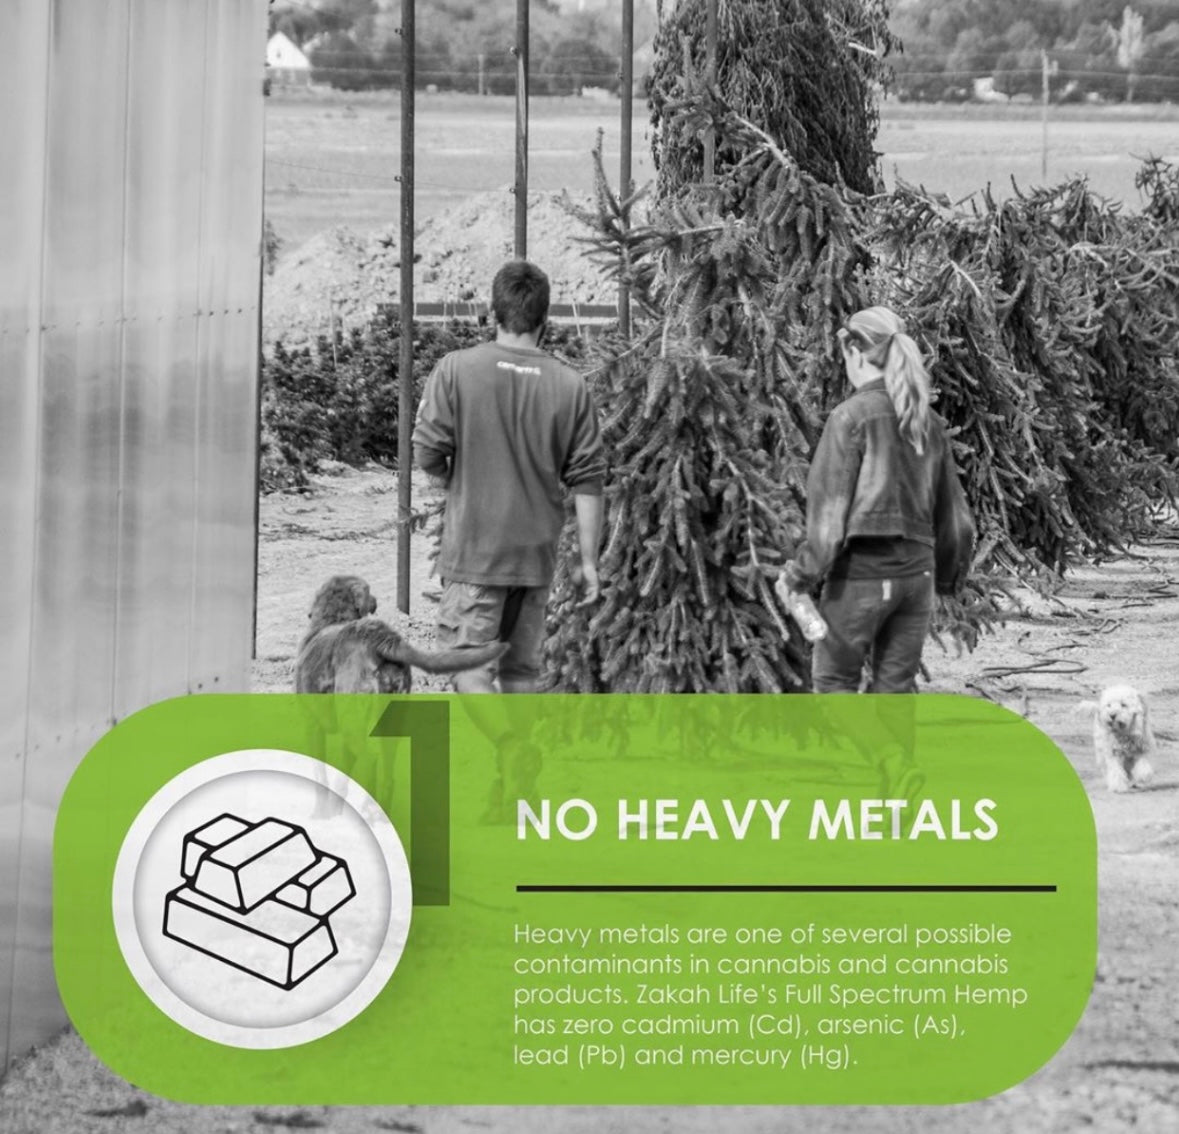 A COPYRIGHT image talking about heavy metals in CBD hemp products